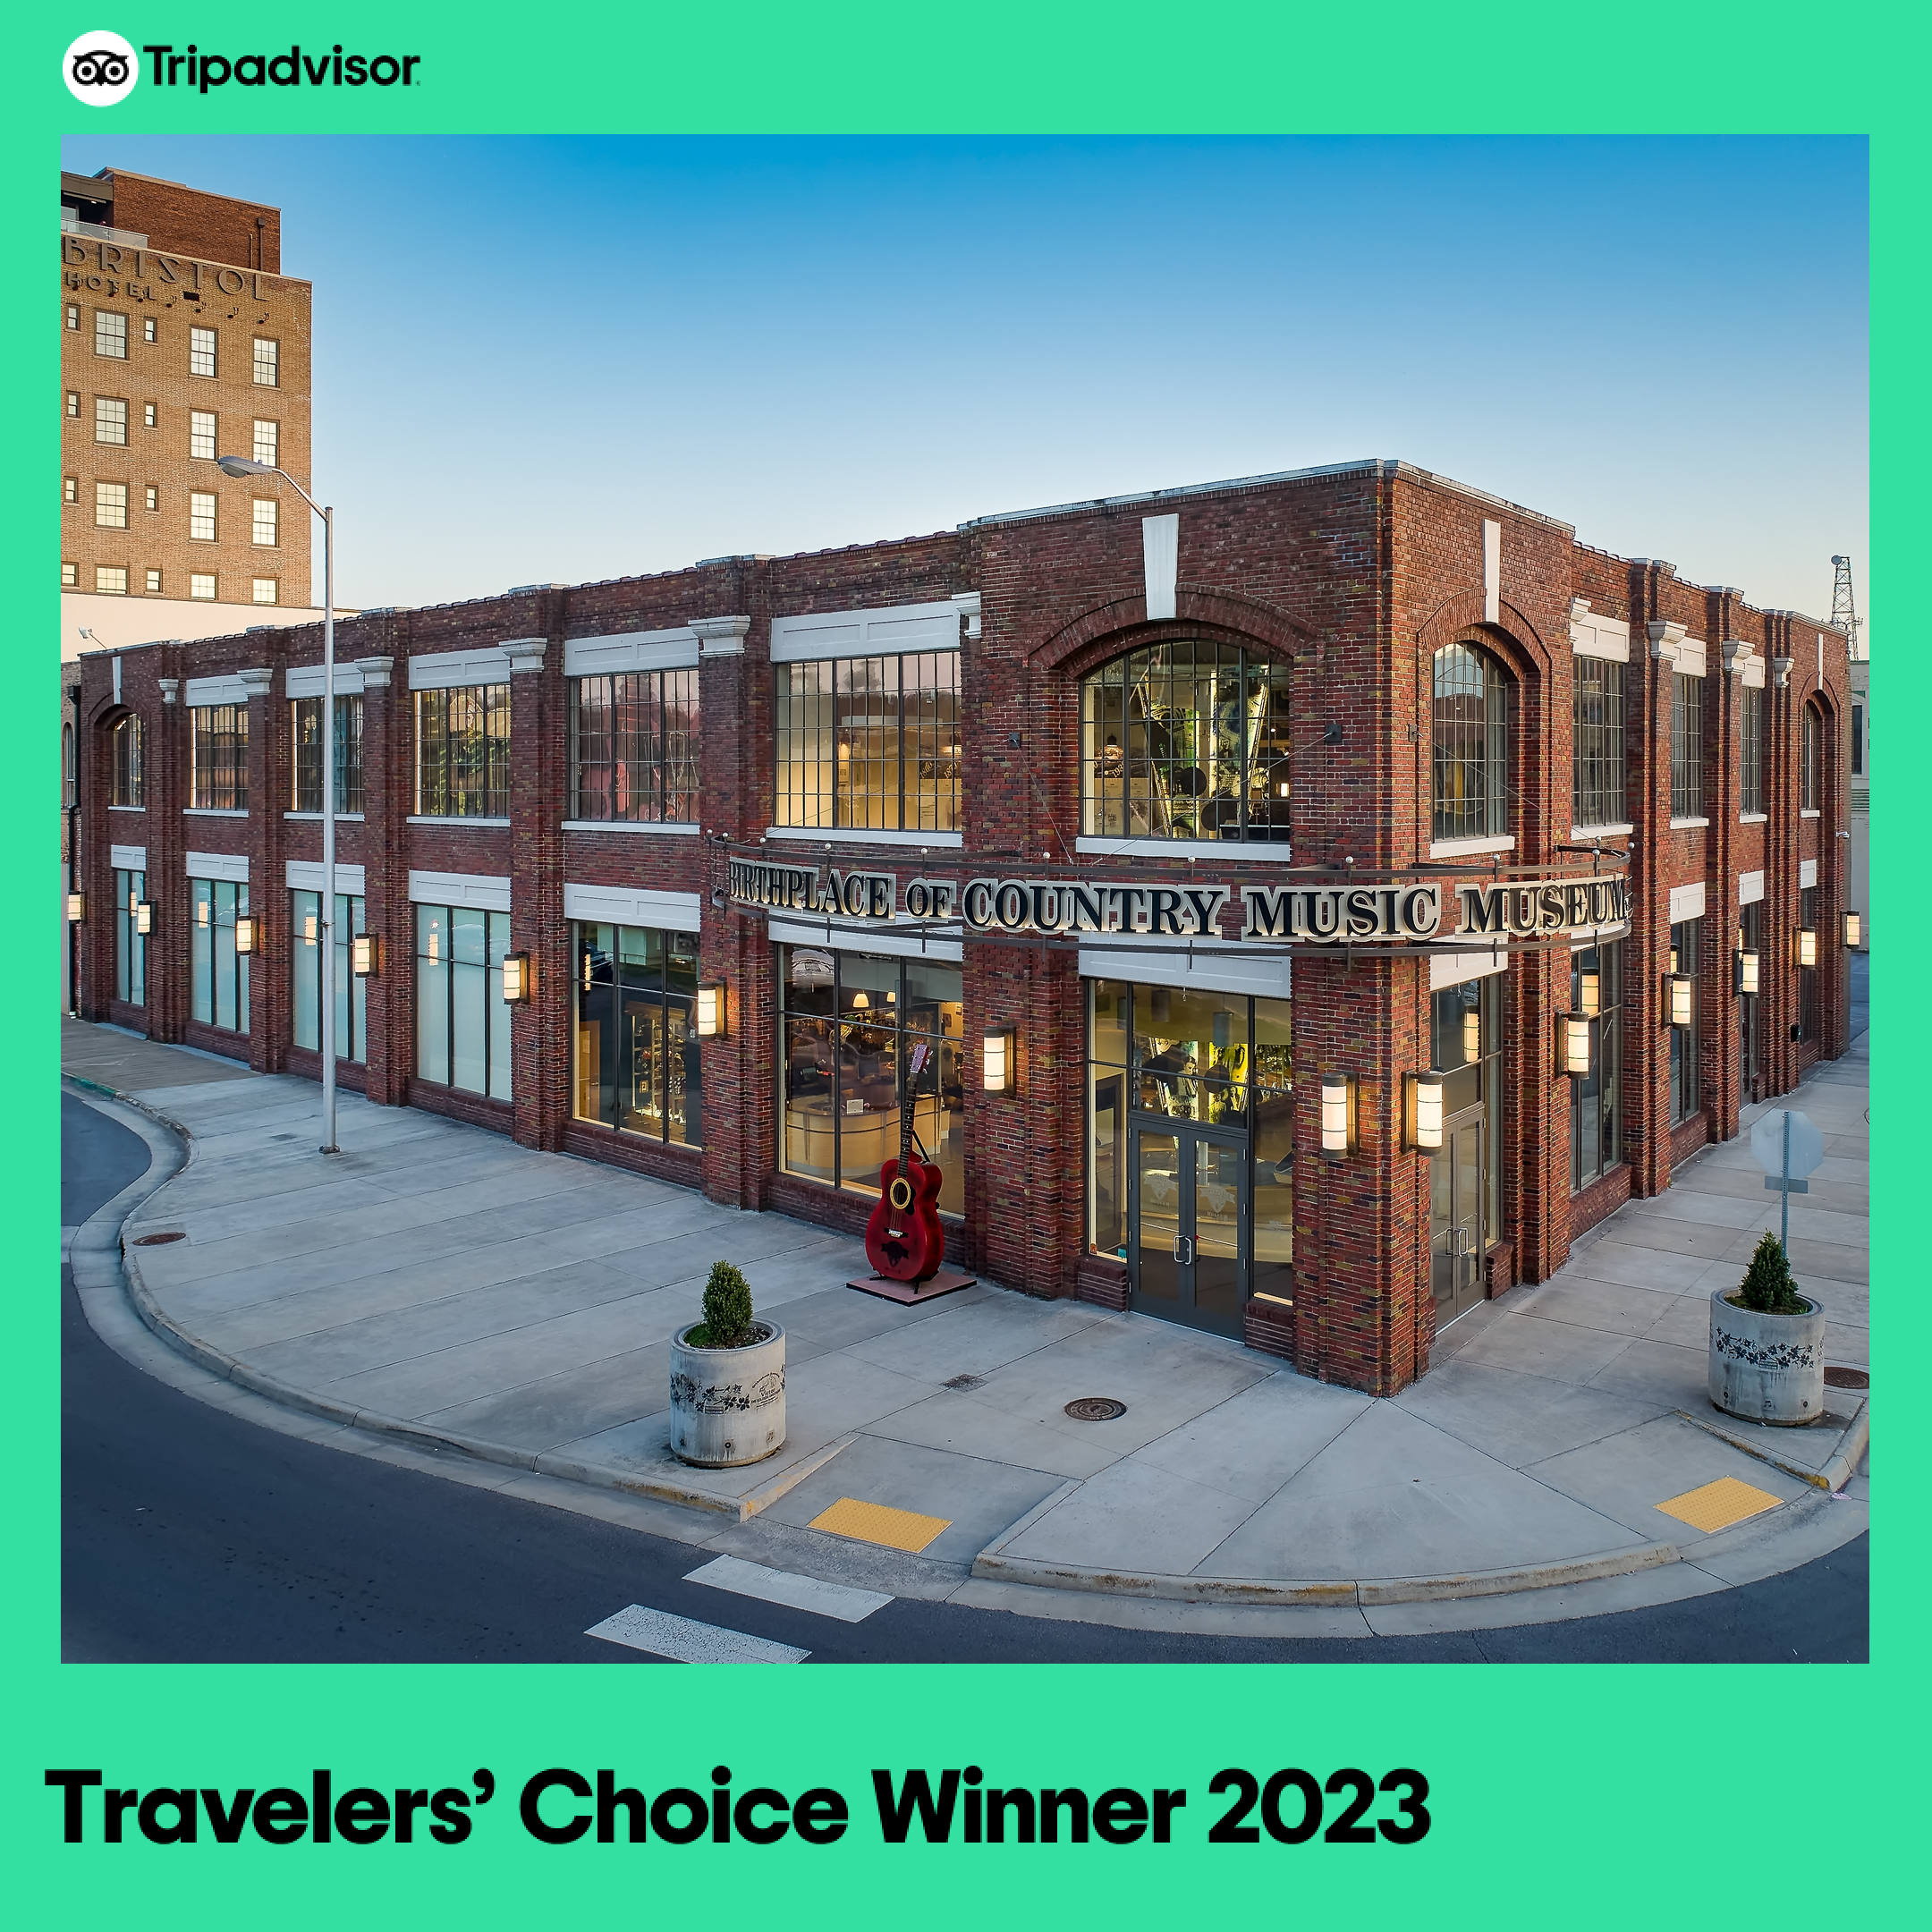 Birthplace of Country Music Museum Recognized as Tripadvisor 2023 Travelers’ Choice Award Winner